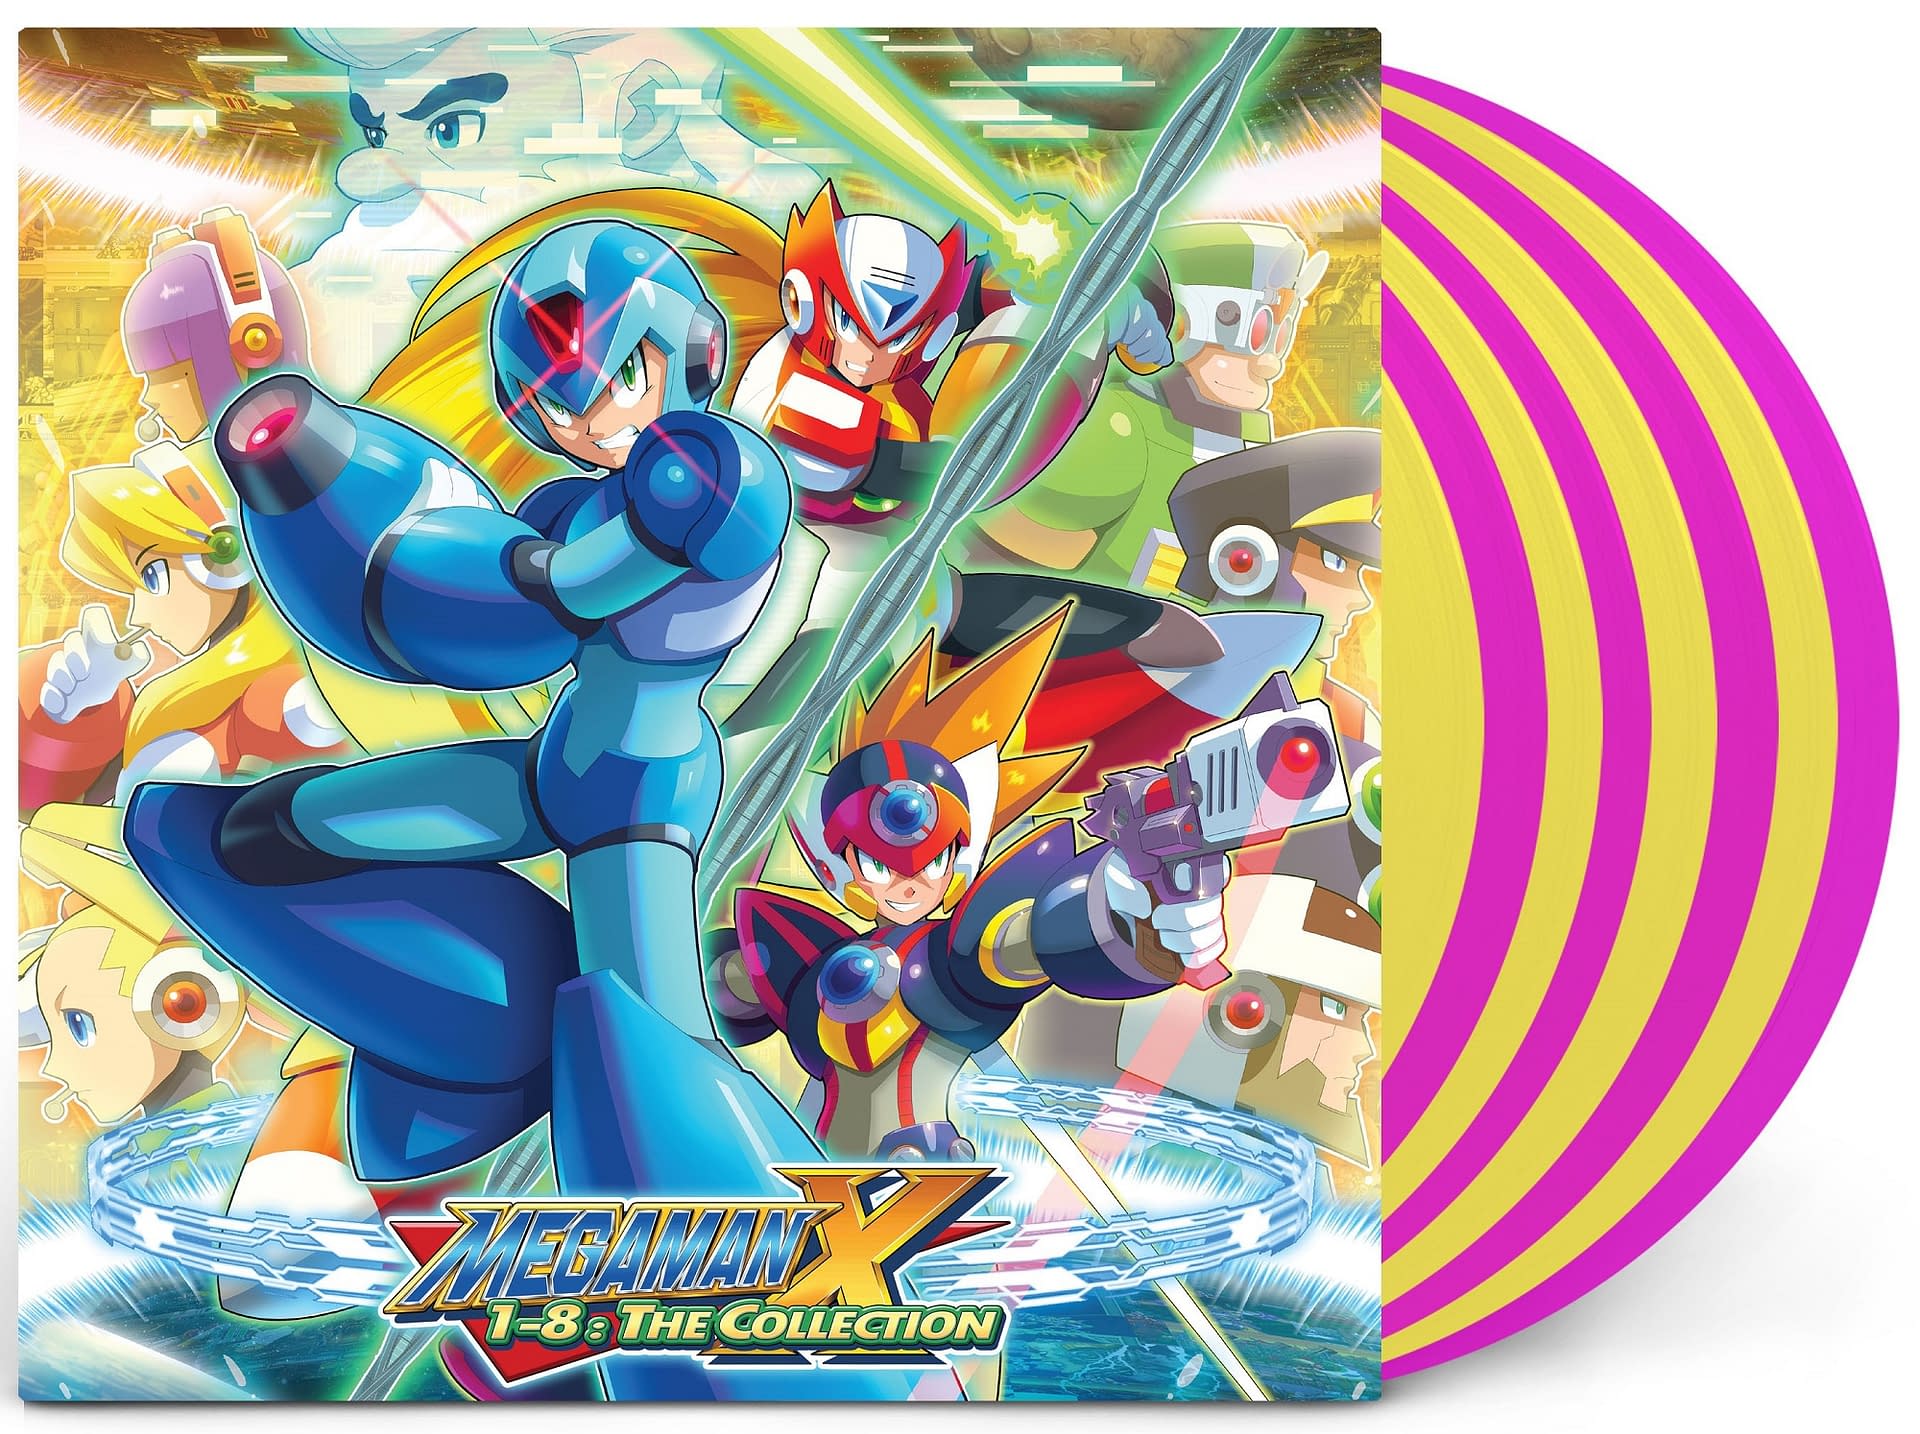 Unthinkable experience cap The Mega Man X Series Is Getting A Vinyl Soundtrack